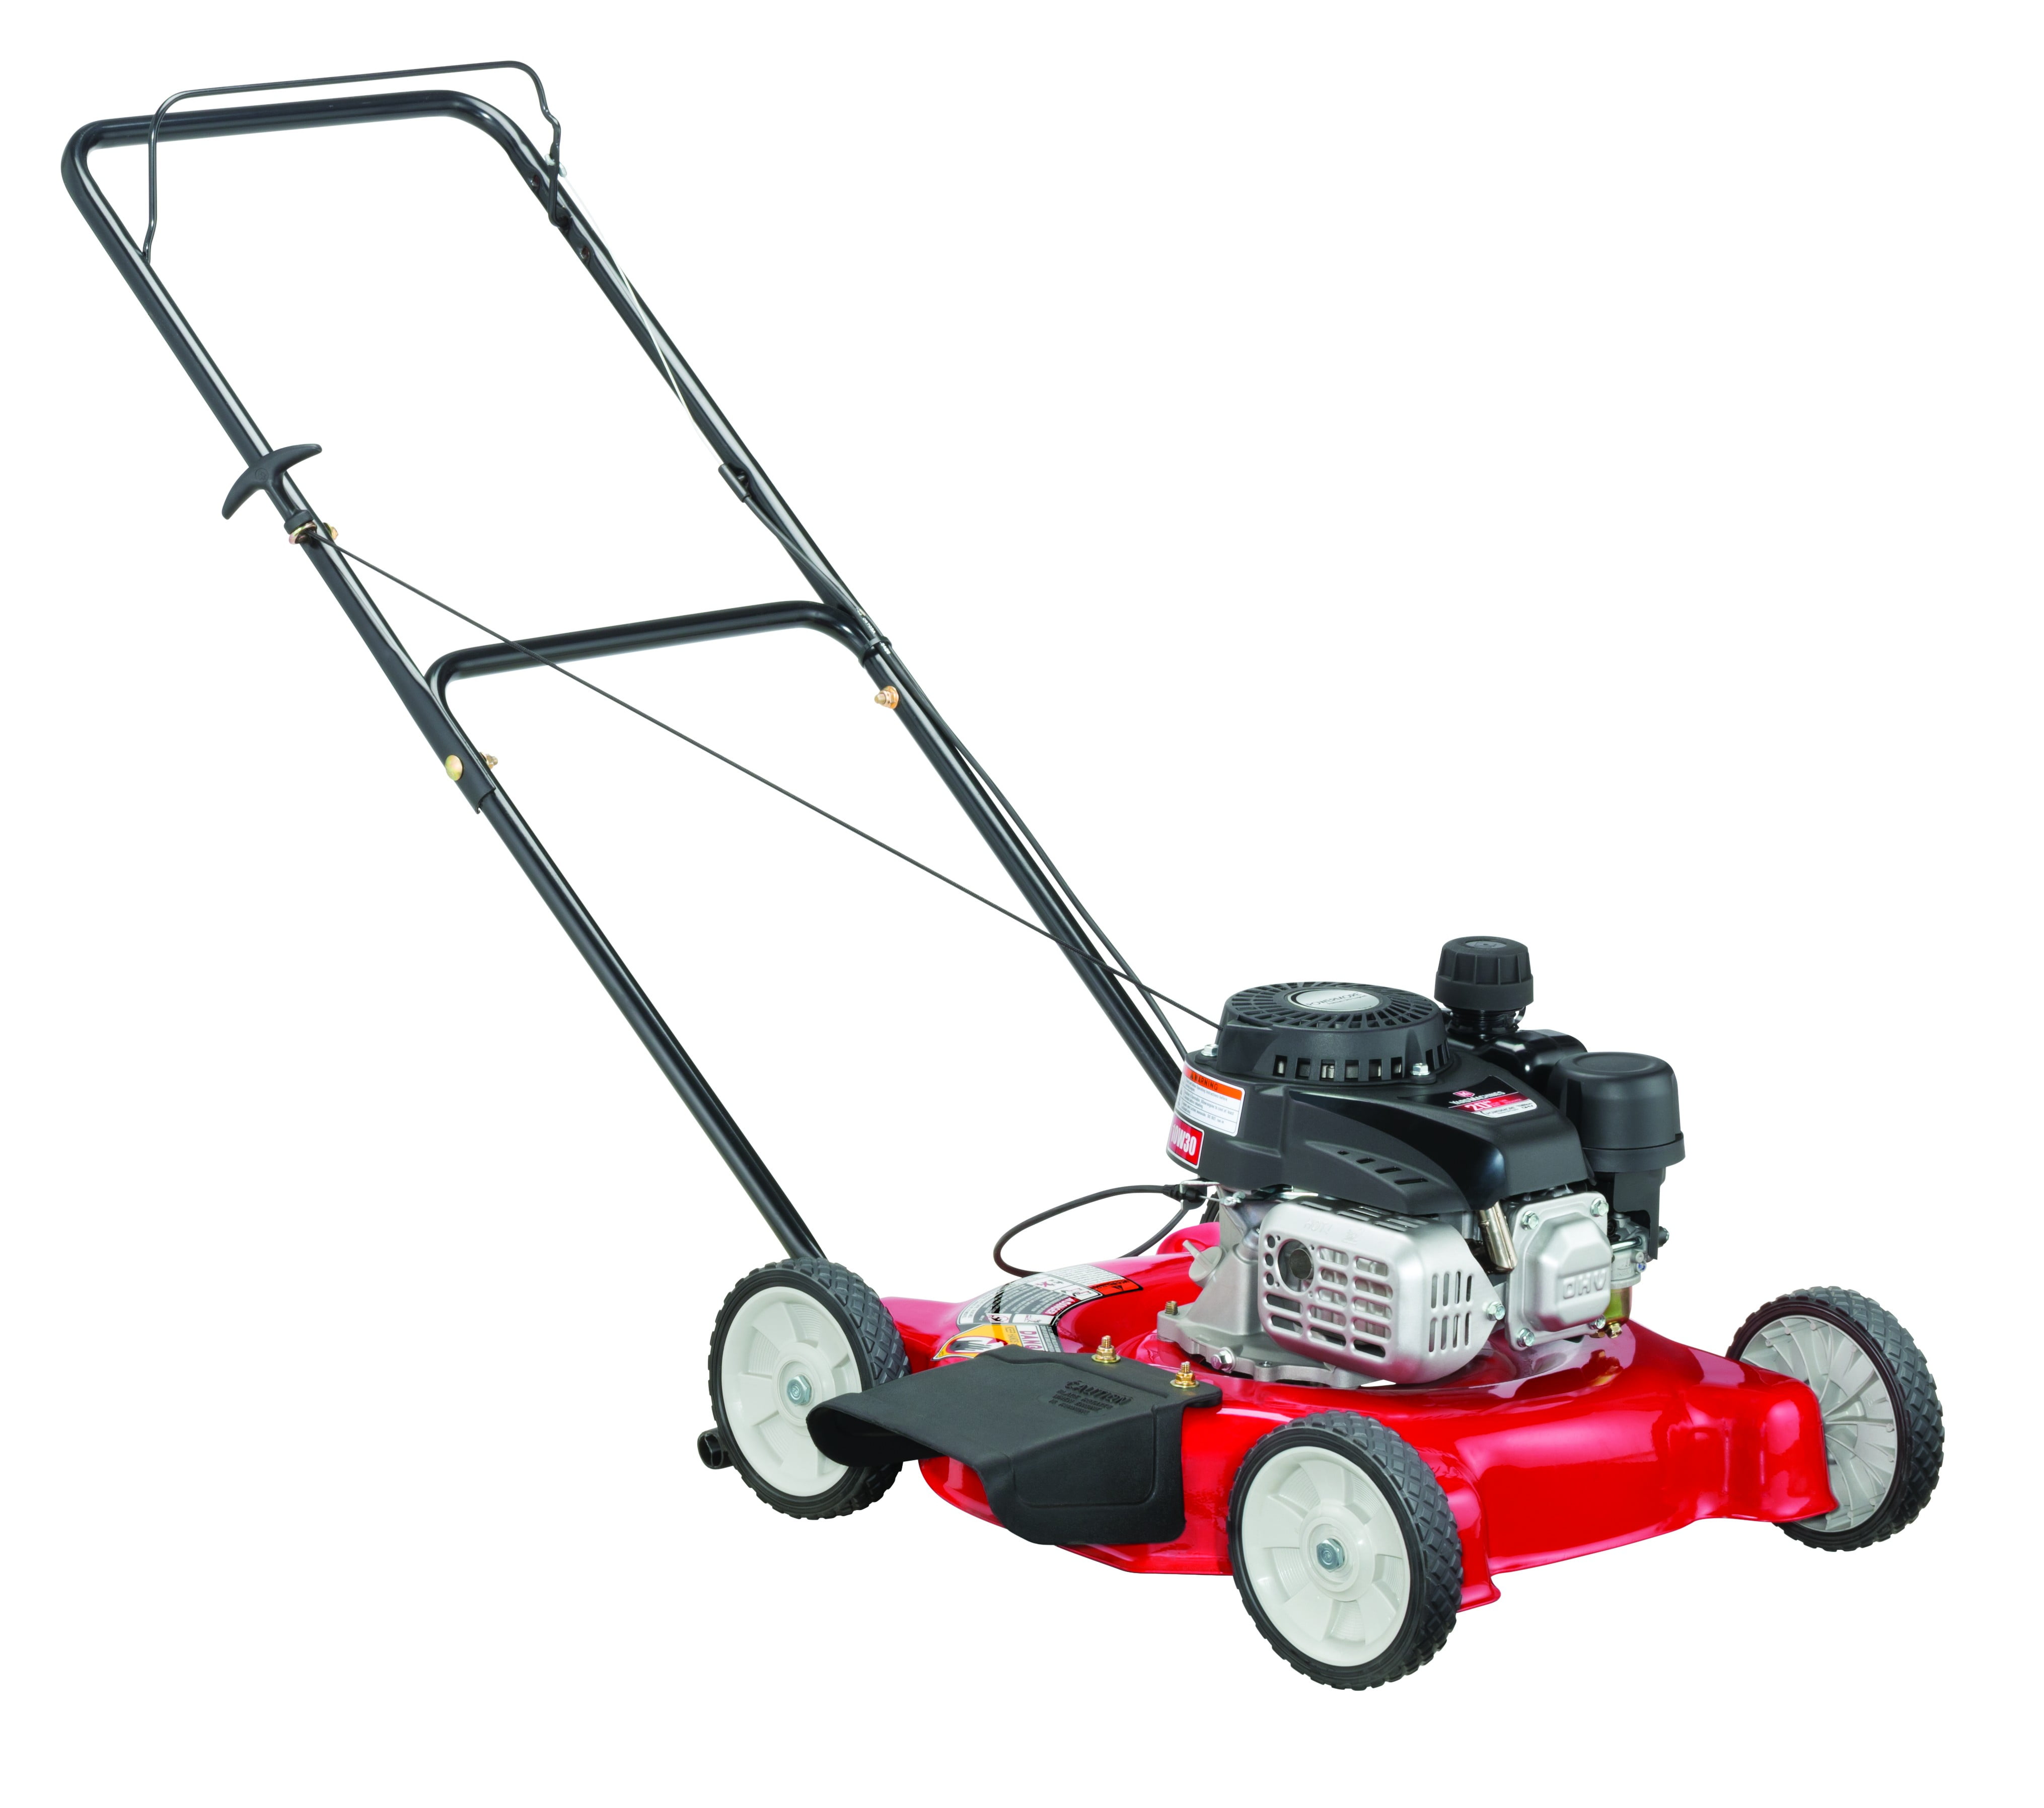 Yard Machines Gas Push Lawn Mower With Side Discharge Walmart